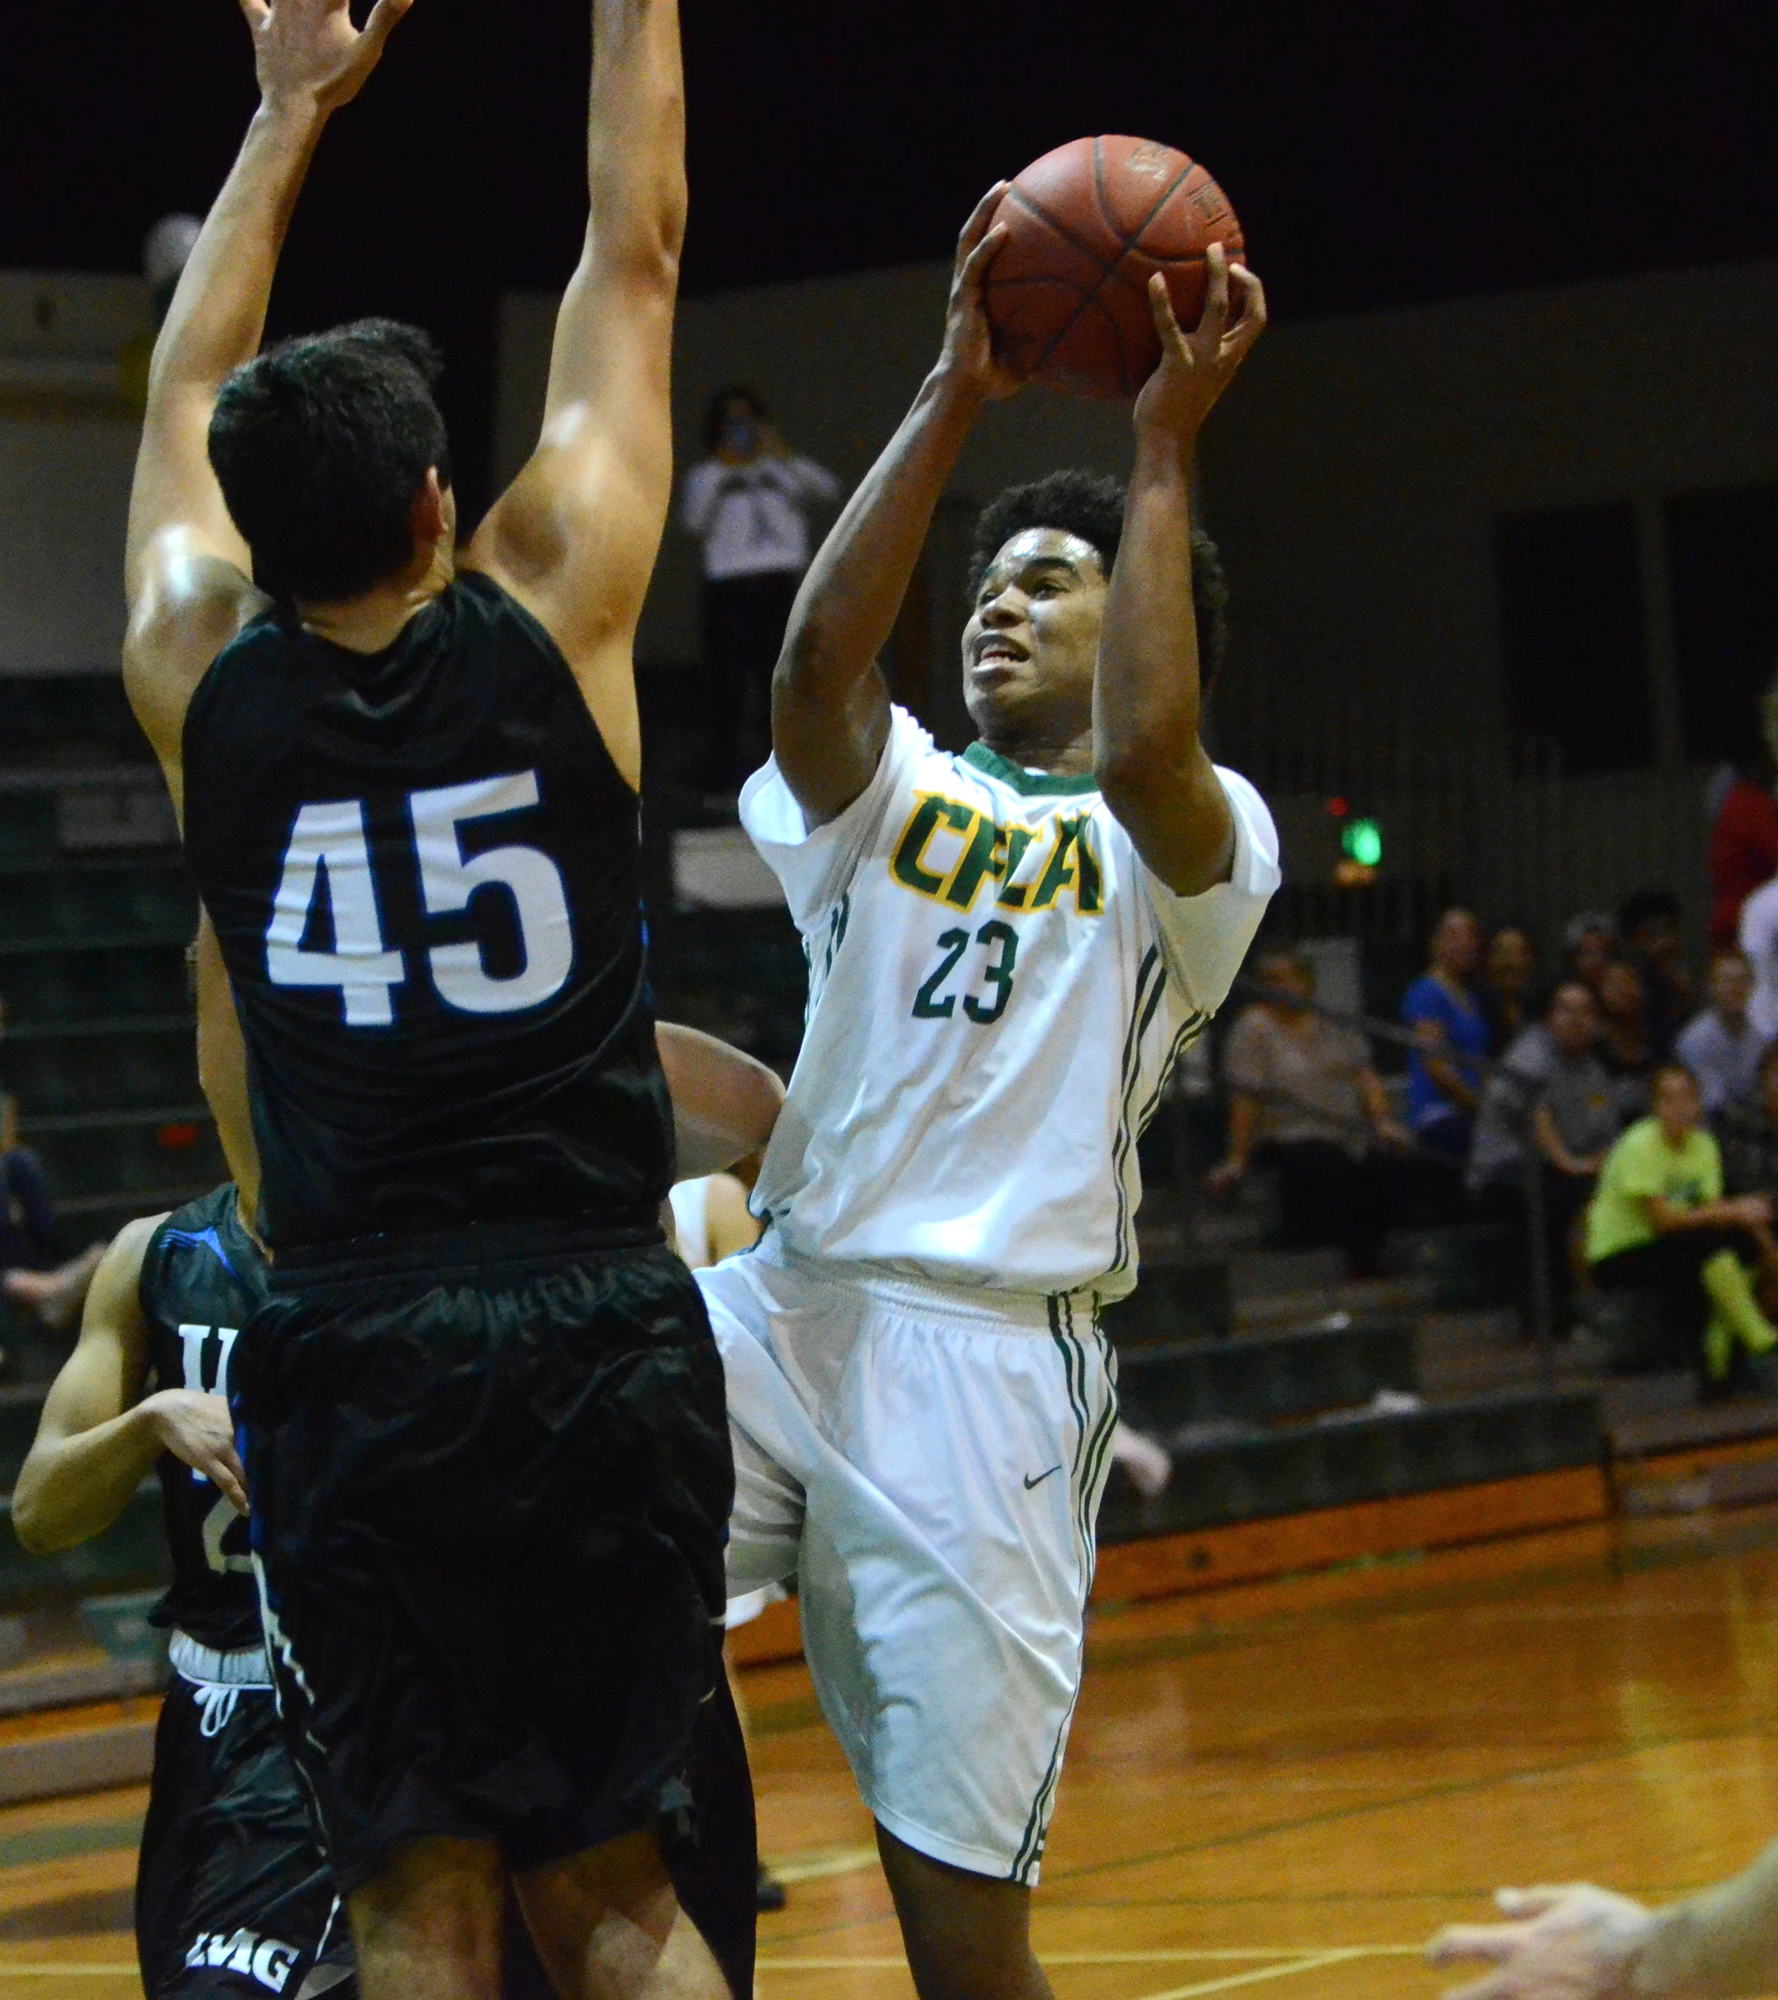 Junior Jacob Newman has played a big role in CFCA's success this season.